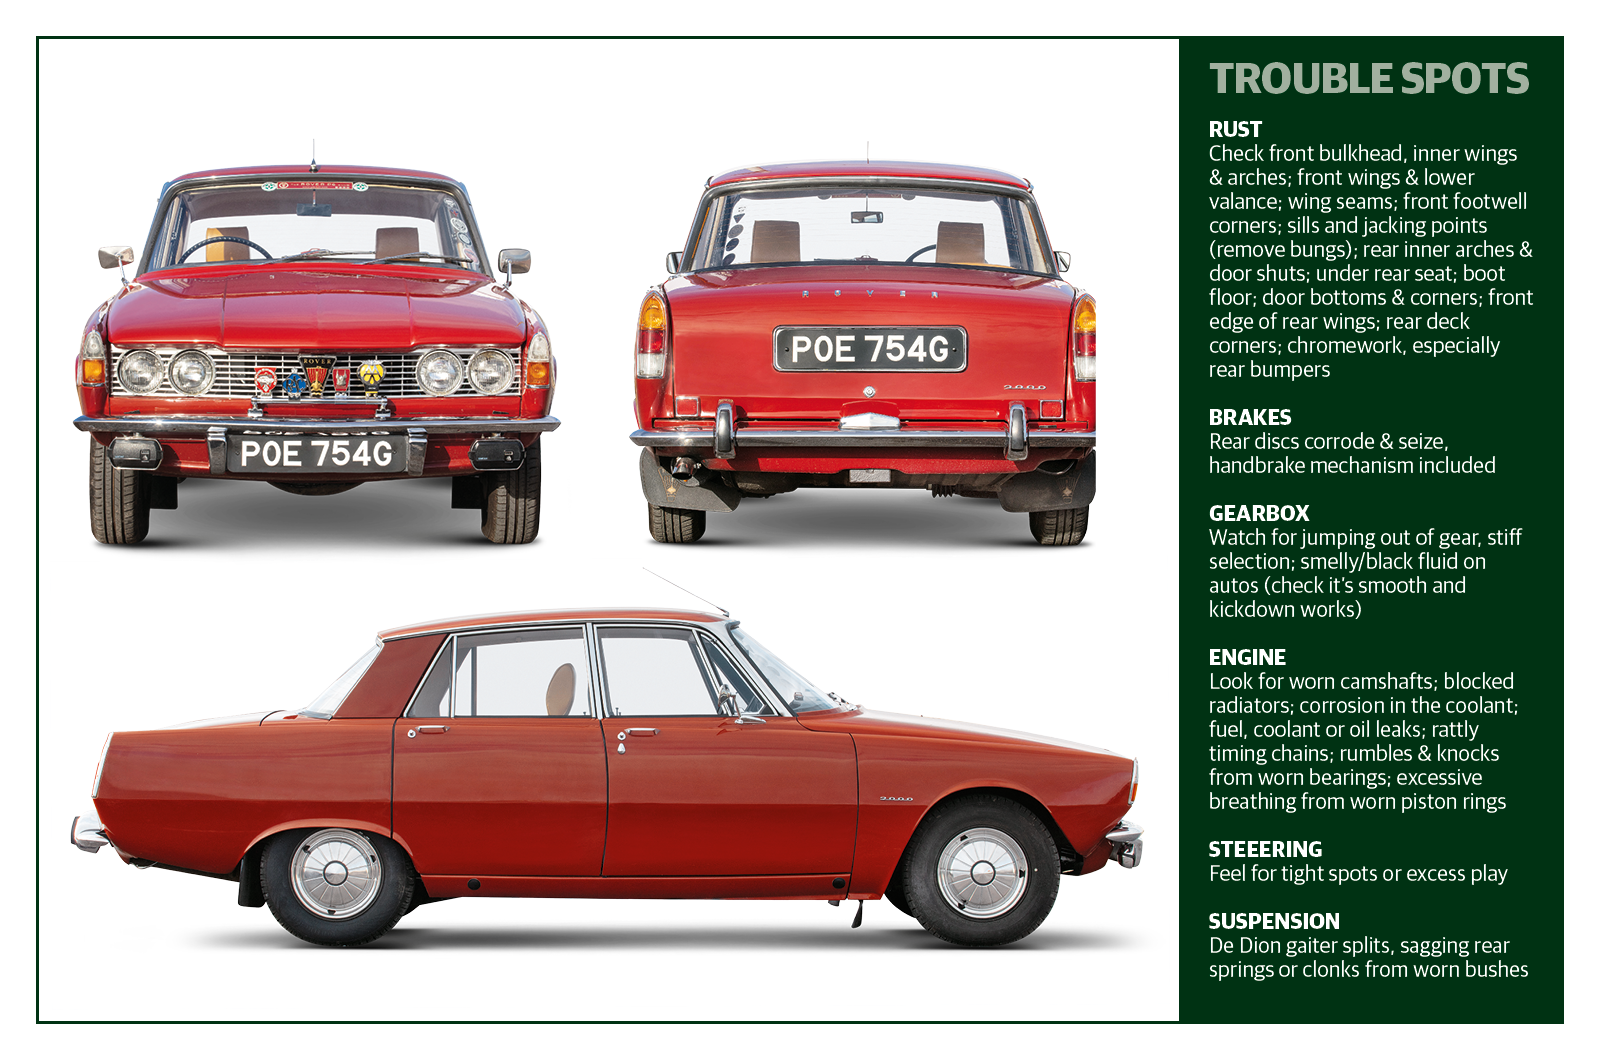 Classic & Sports Car – Buyer’s guide: Rover P6